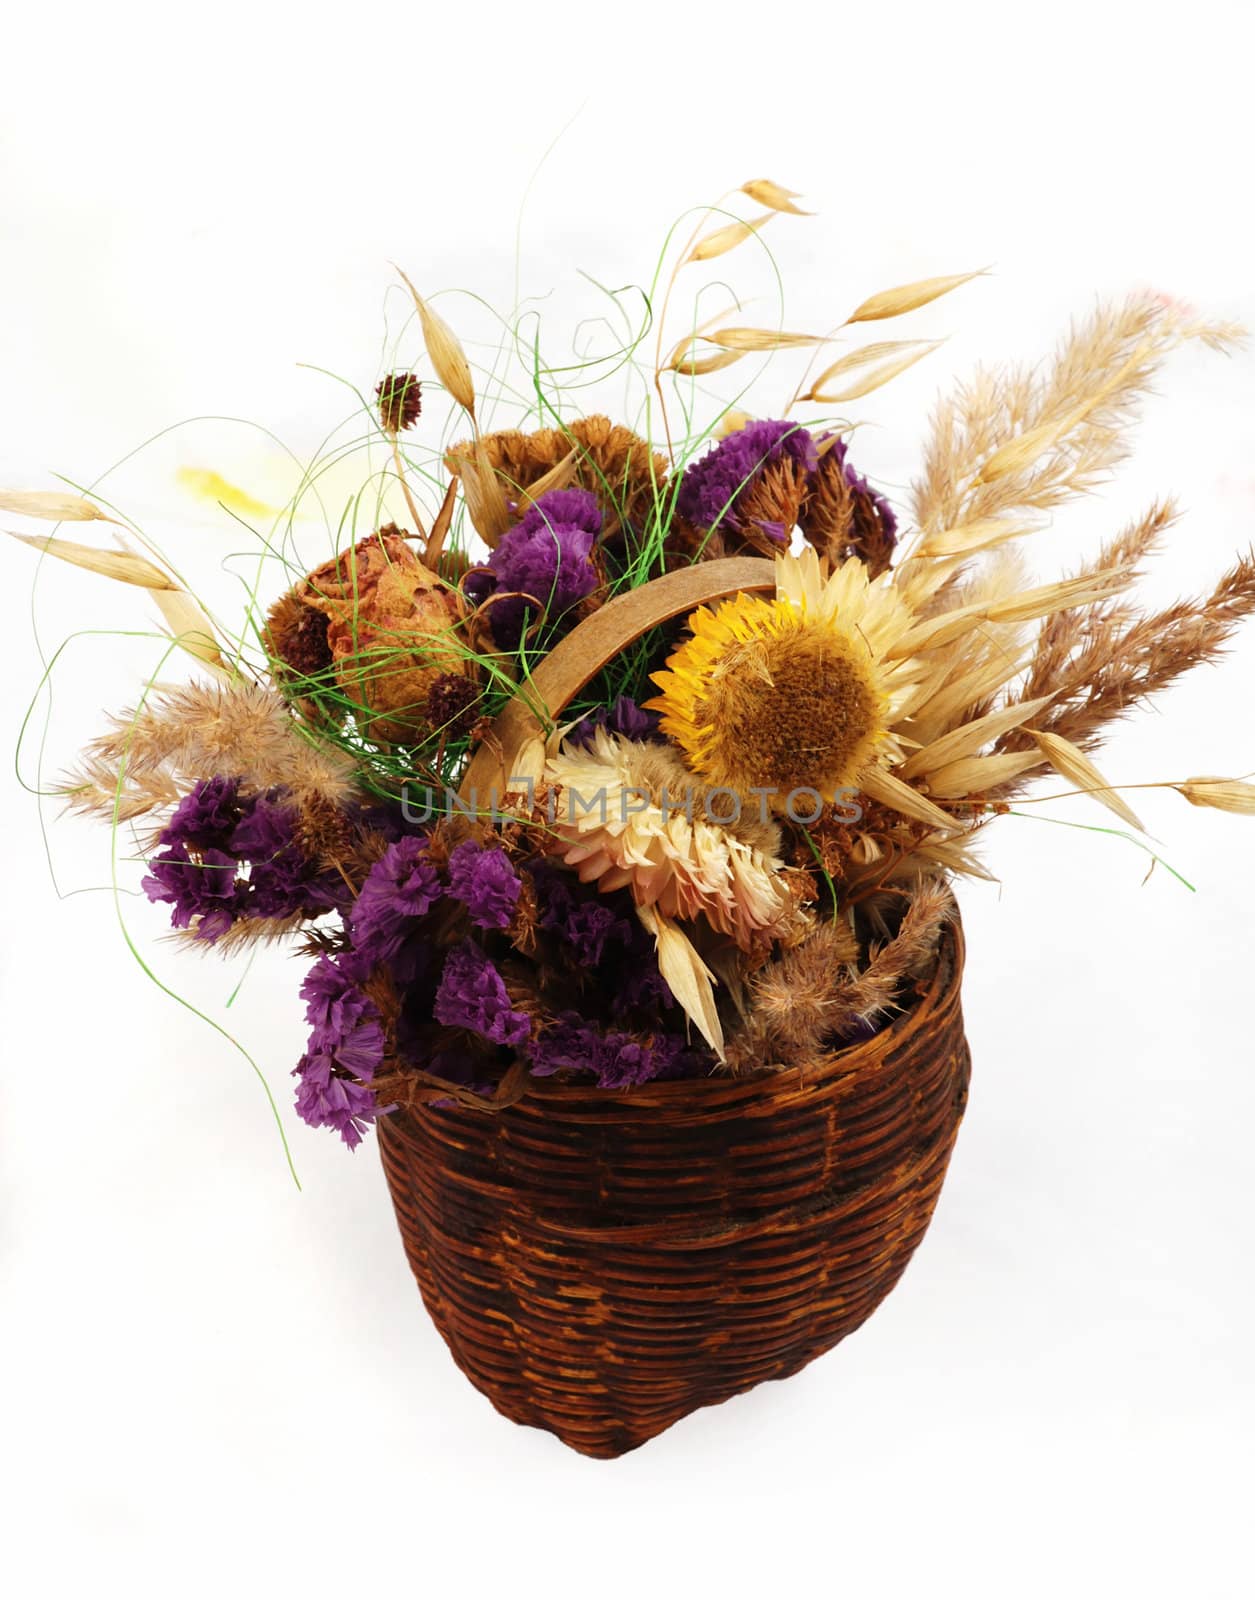 Dry flowers in the small basket arranging on the white background